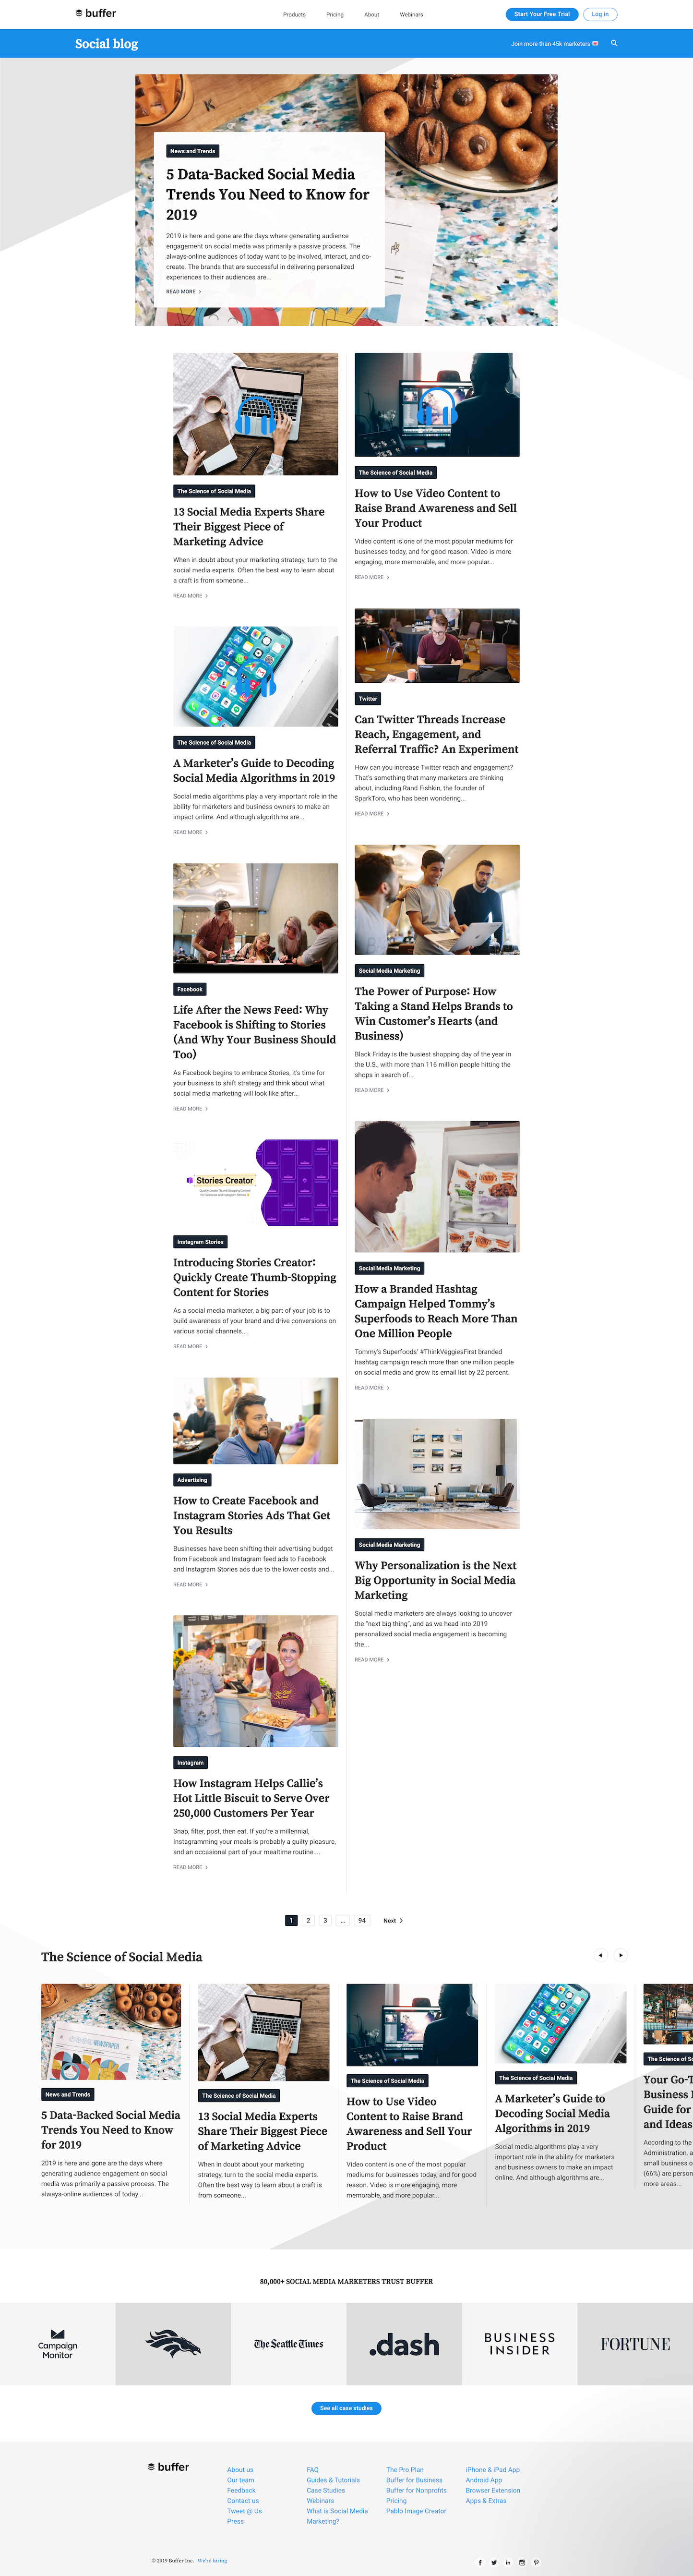 Screenshot of the Resources - Blog page from the Buffer website.